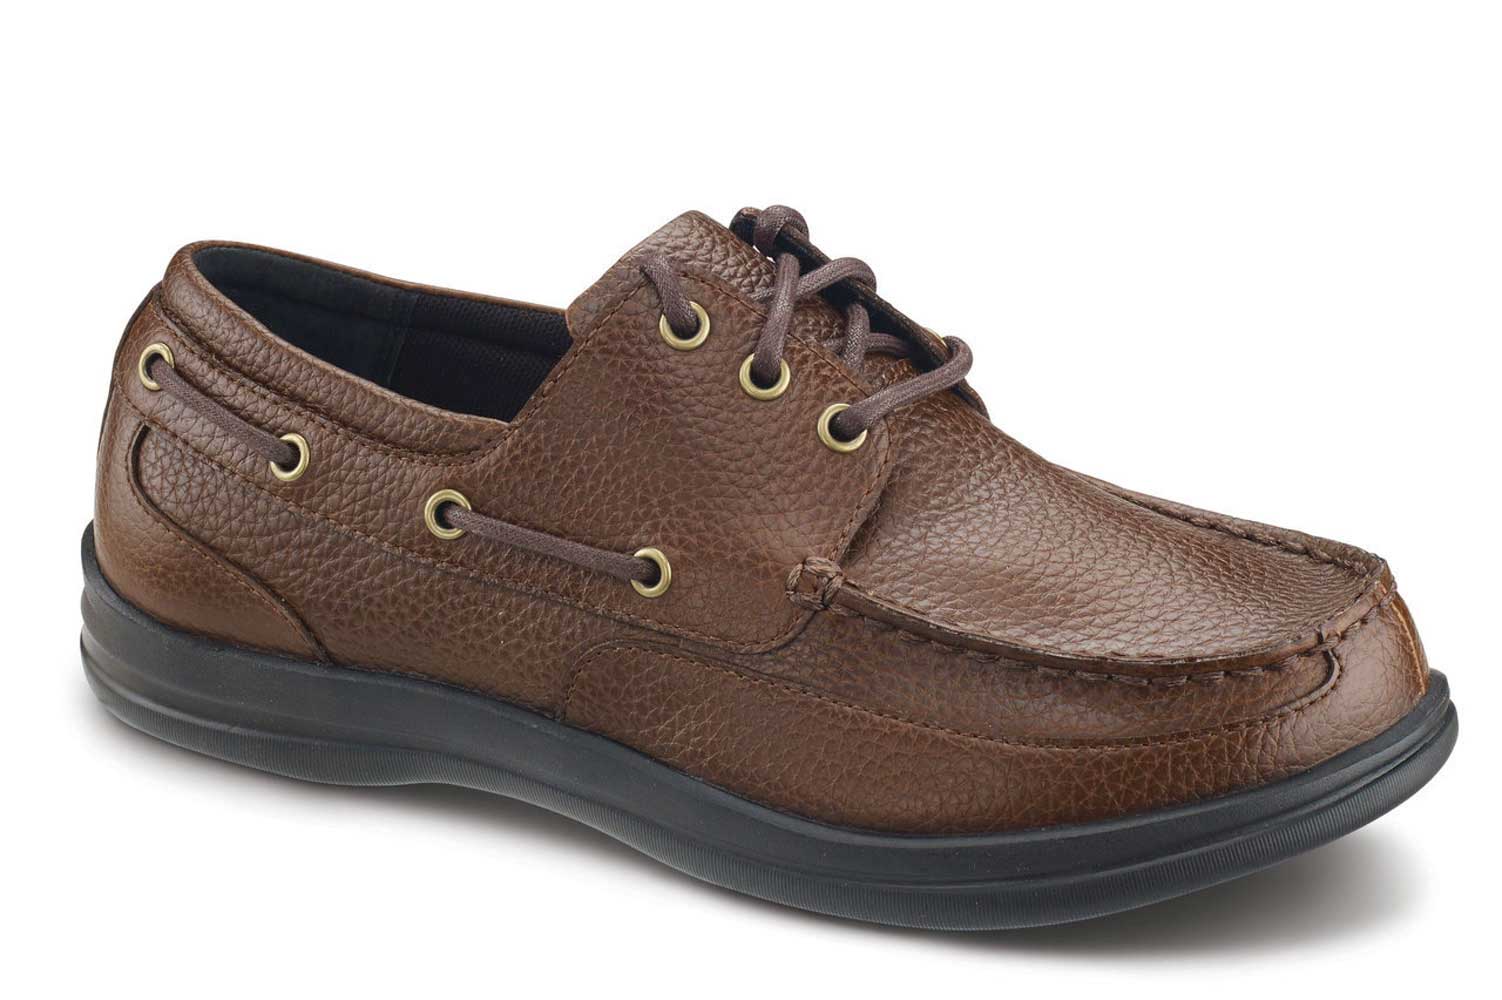 Apex Shoes A1100M Men's Boat Shoe - Comfort Orthopedic Diabetic Shoe - Extra Depth For Orthotics - Extra Wide